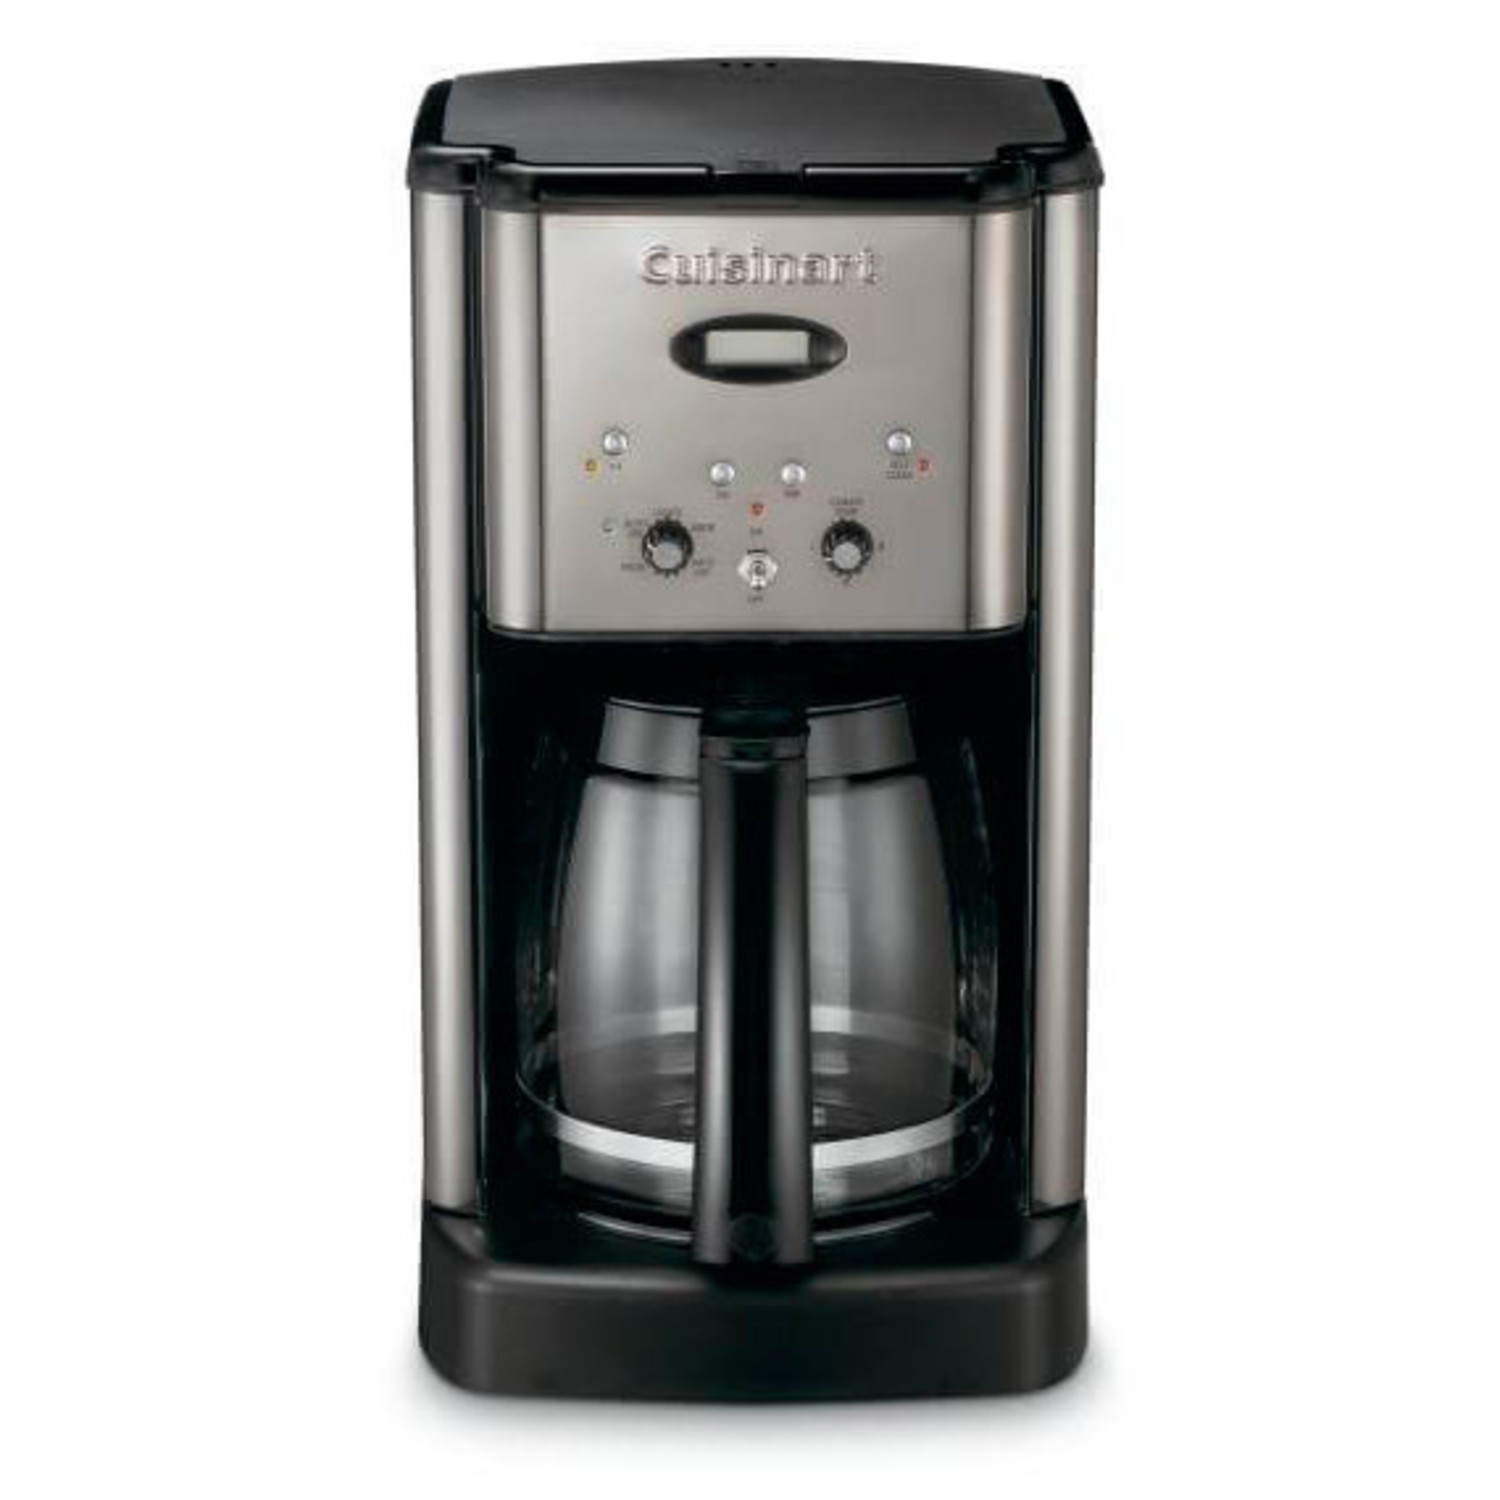 Cuisinart Brew Central 12-Cup Programmable Coffee Maker - Stainless Steel -  DCC-1200P1